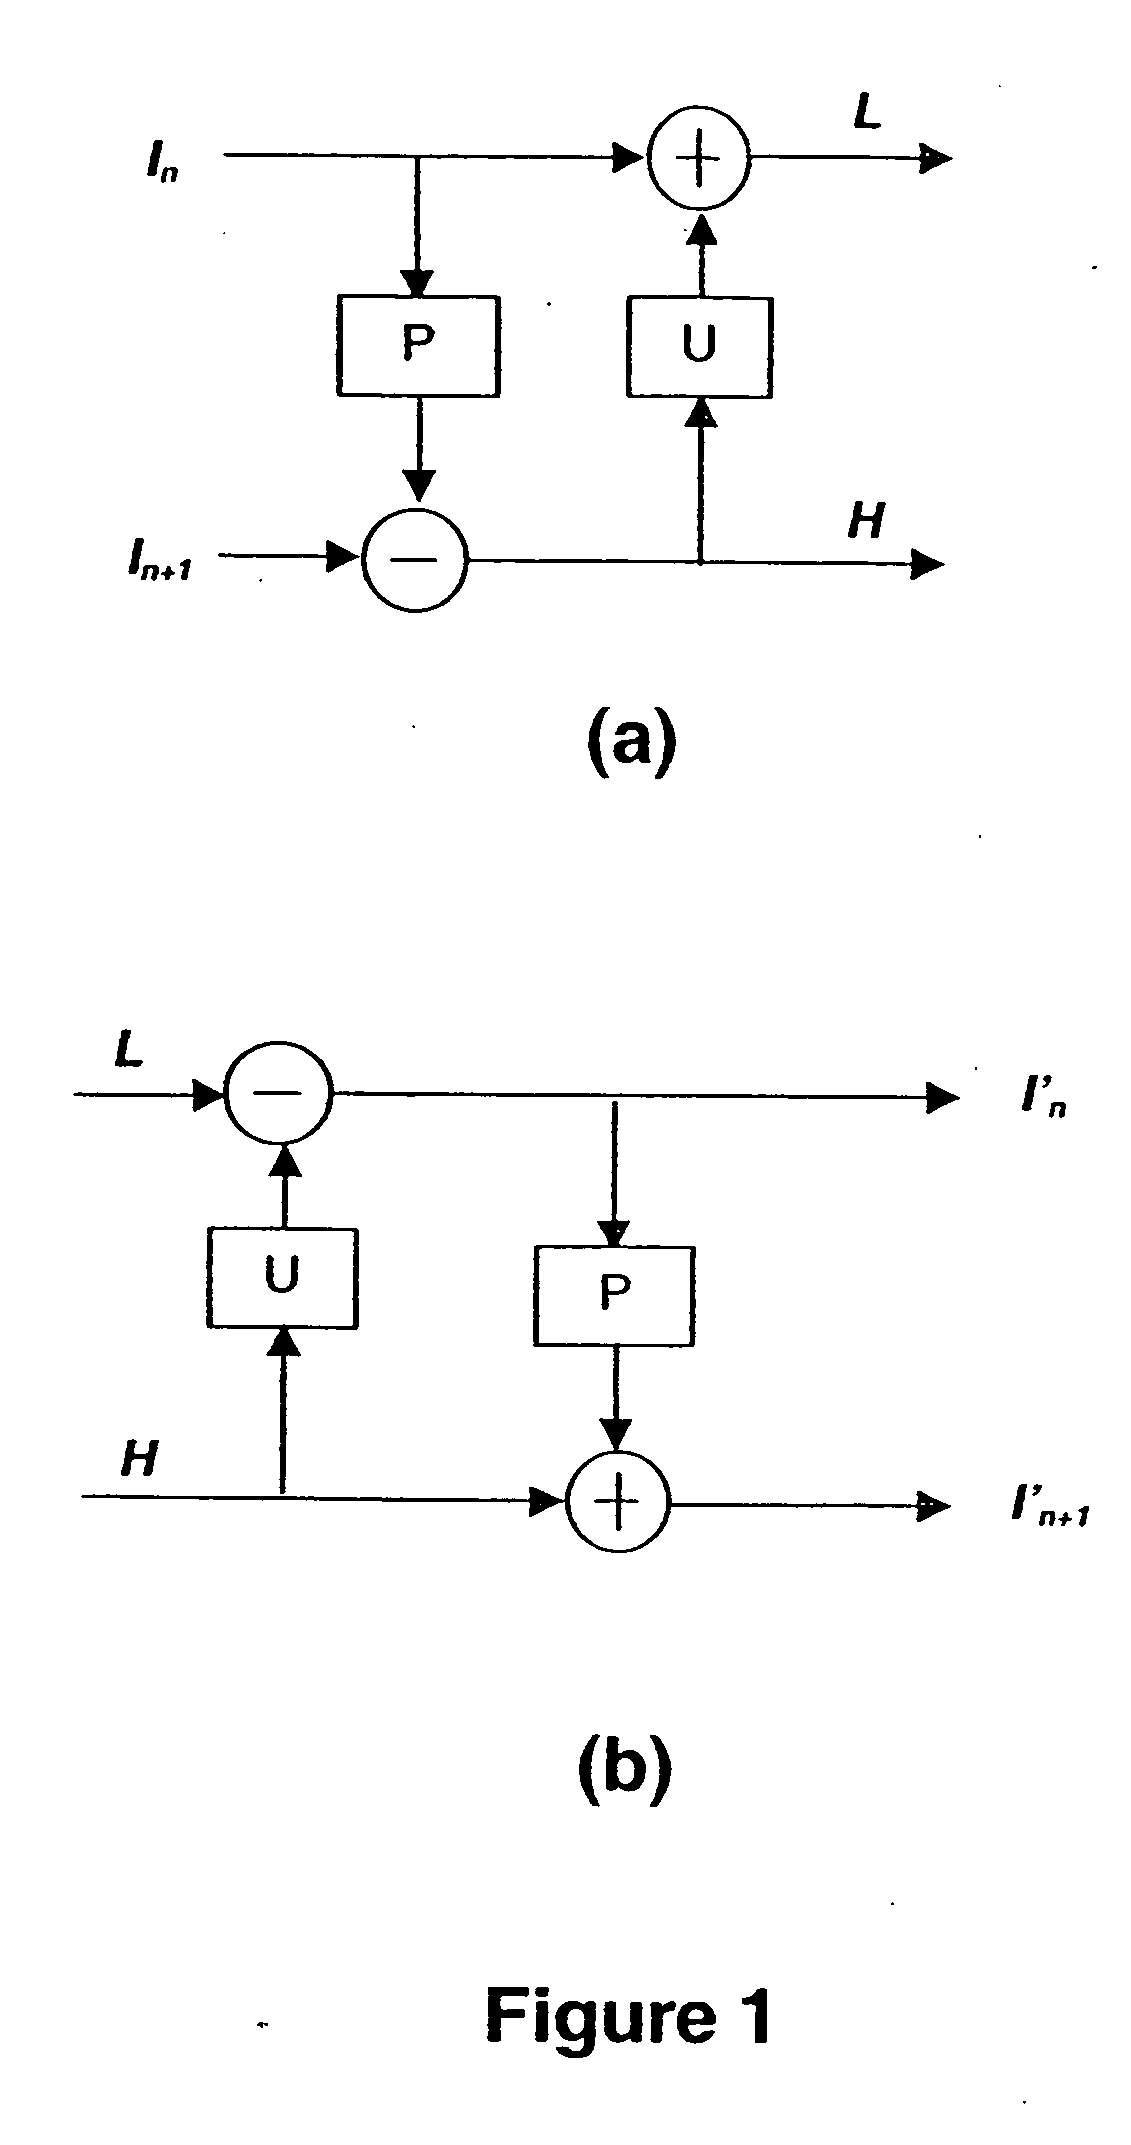 Method and apparatus for update step in video coding using motion compensated temporal filtering